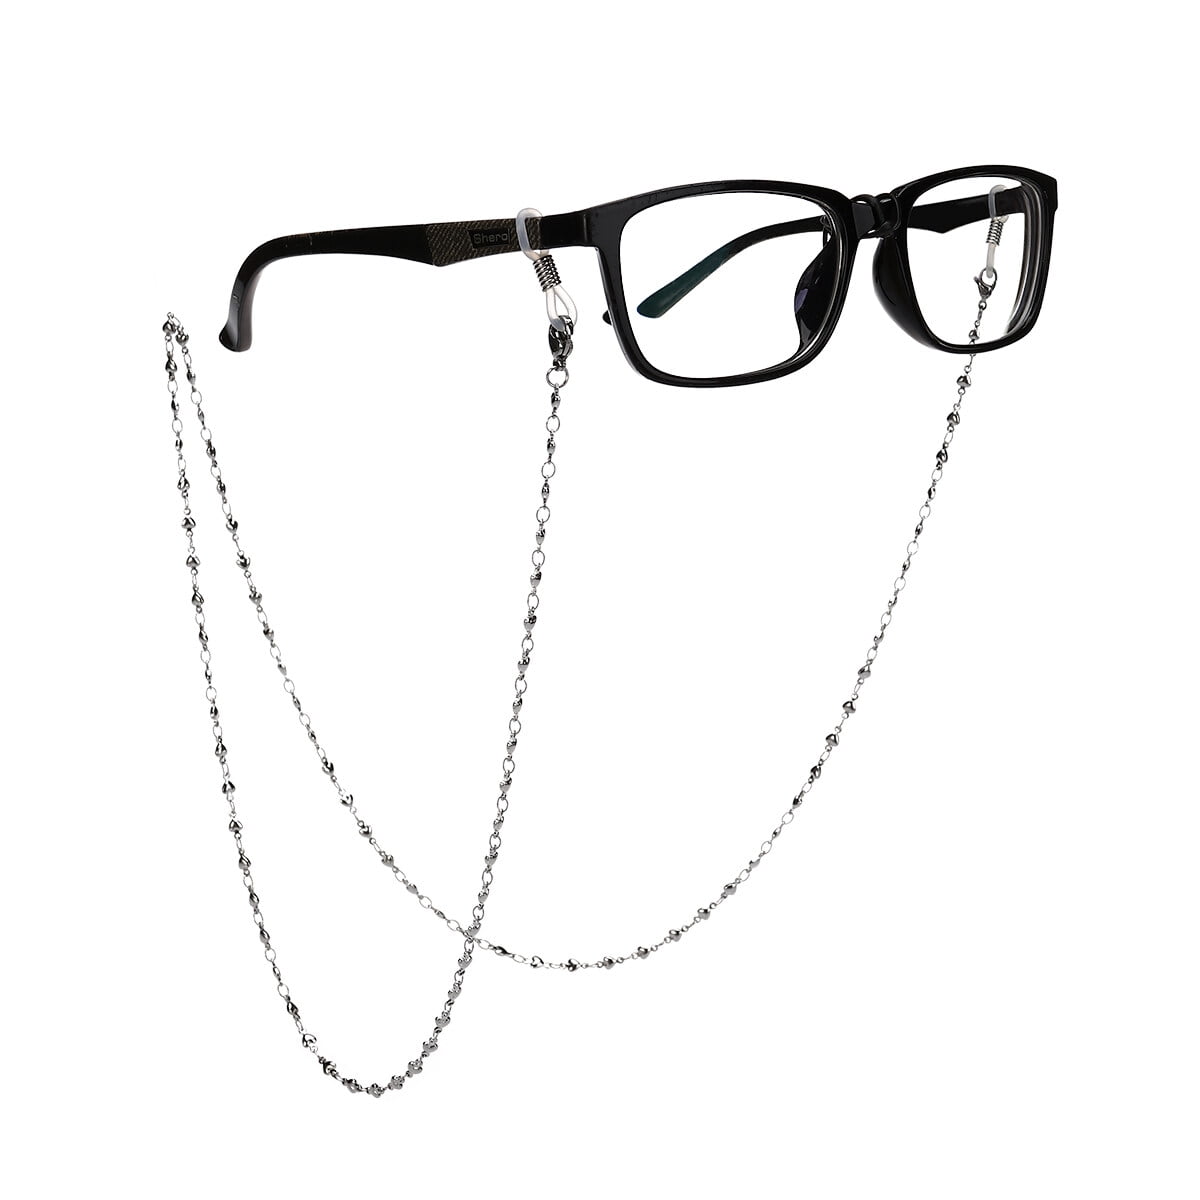 Sither Pearls Eyeglass Chain for Women Sunglasses Chian Reading Glasses  Chain Strap Necklace Eyeglass Holder Cords Lanyards for Elderly Christmas  Gift